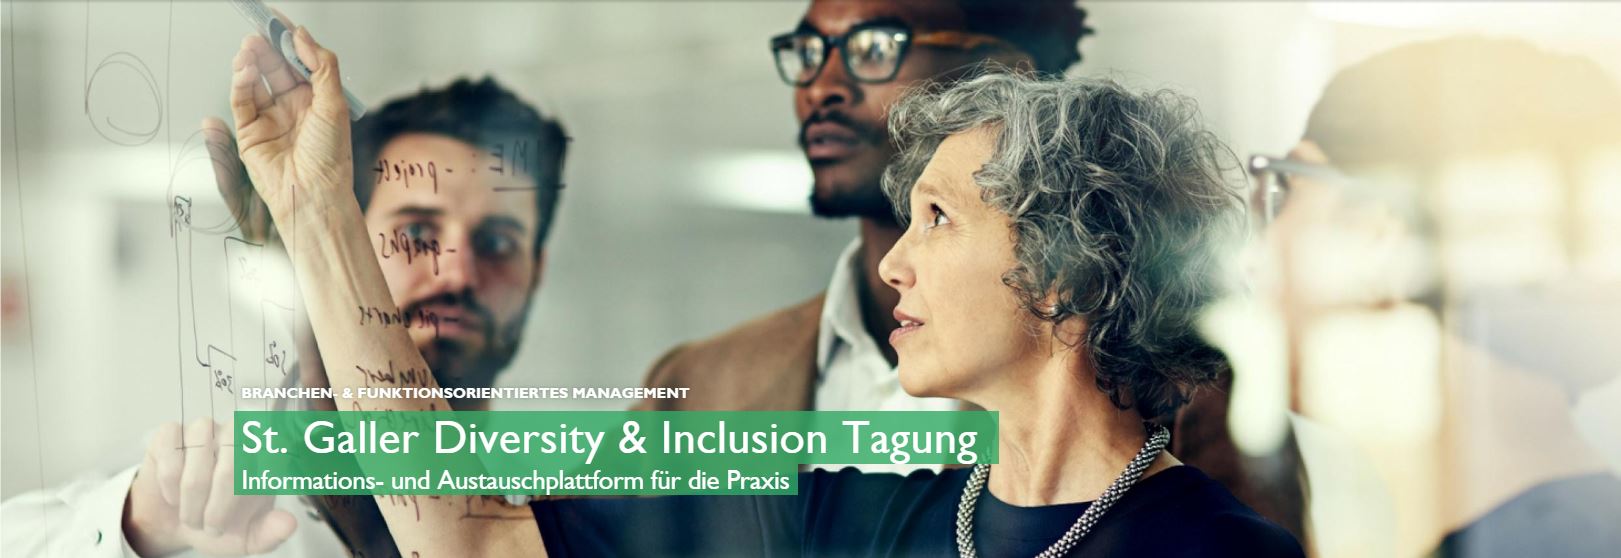 St. Galler Diversity & Inclusion Tagung